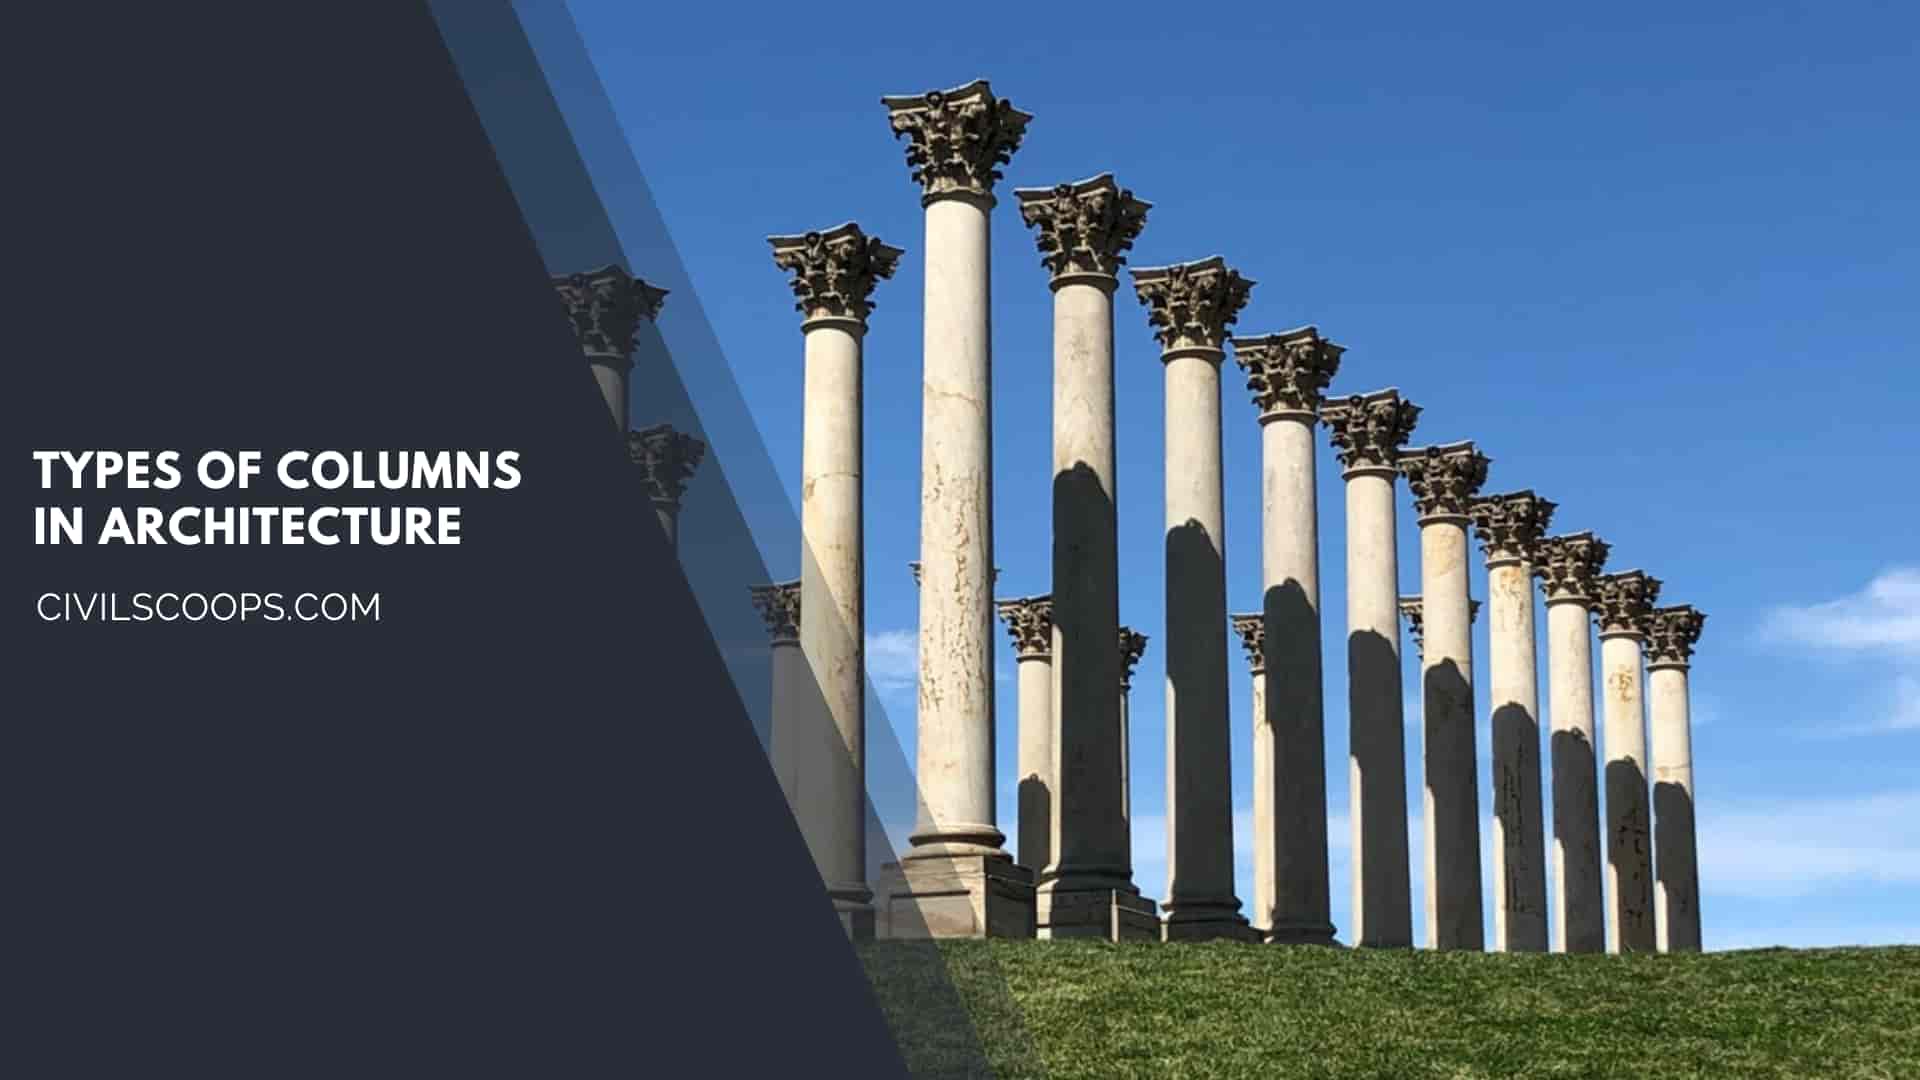 Types of Columns in Architecture